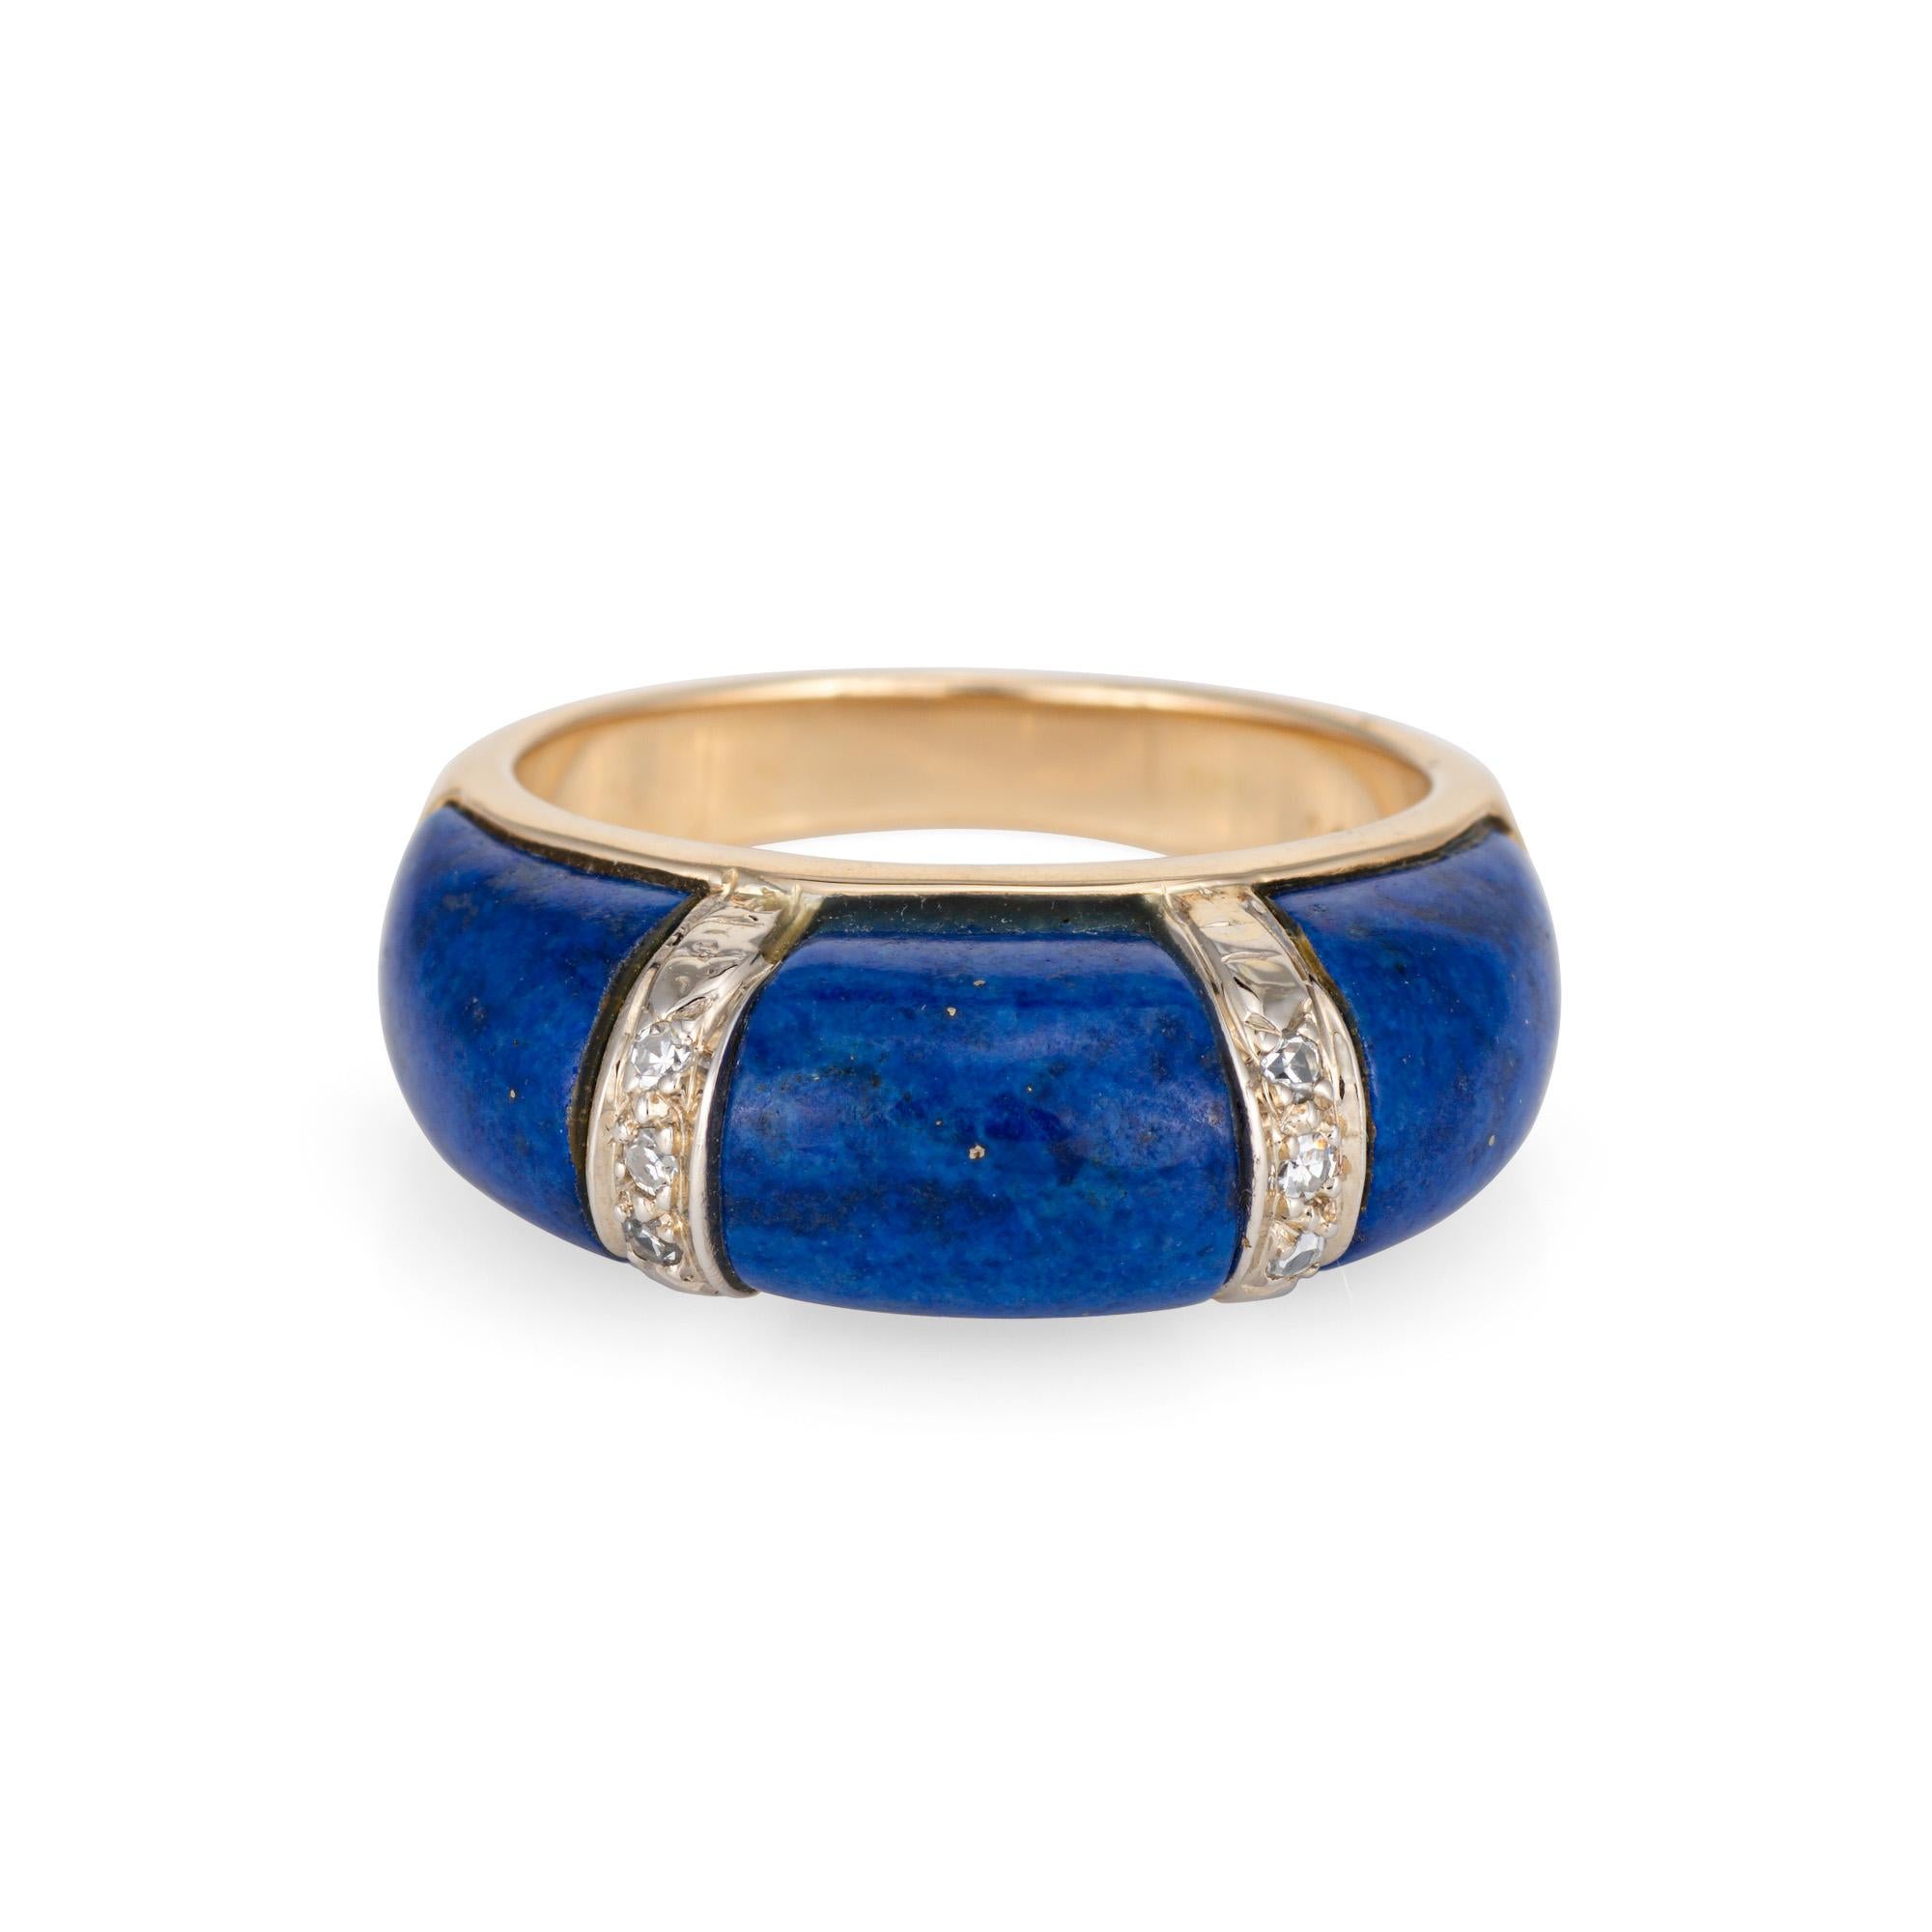 Stylish lapis lazuli & diamond dome ring crafted in 14 karat yellow gold (circa 1970s). 

Diamonds total an estimated 0.03 carats (estimated at H-I color and SI1-I1 clarity). Lapis lazuli measures 7.5mm wide (in very good condition and free of